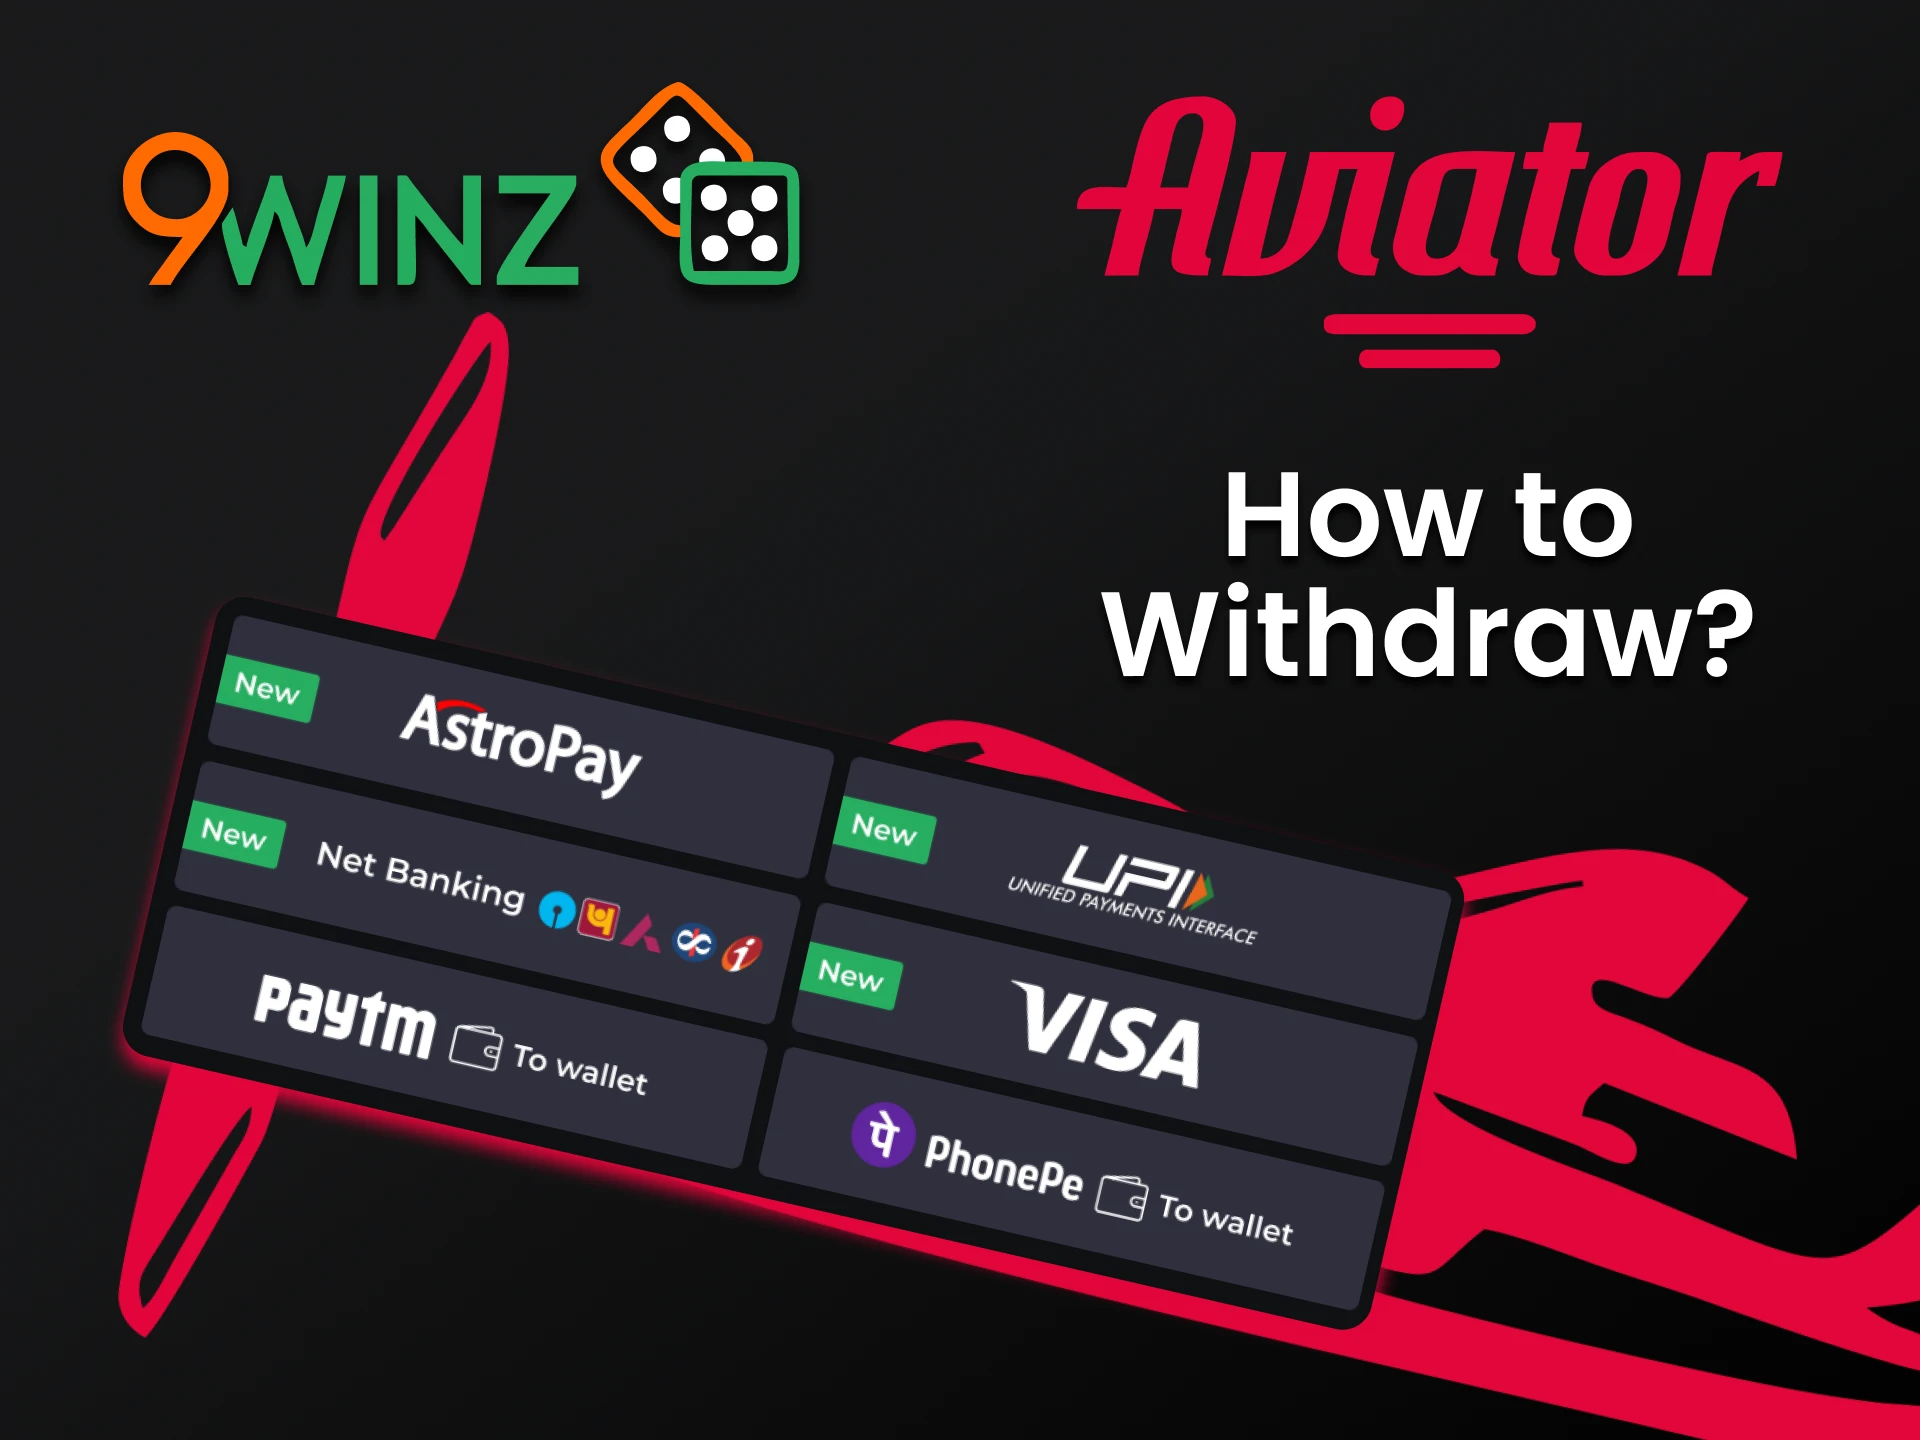 Withdraw funds in a convenient way from 9winz.